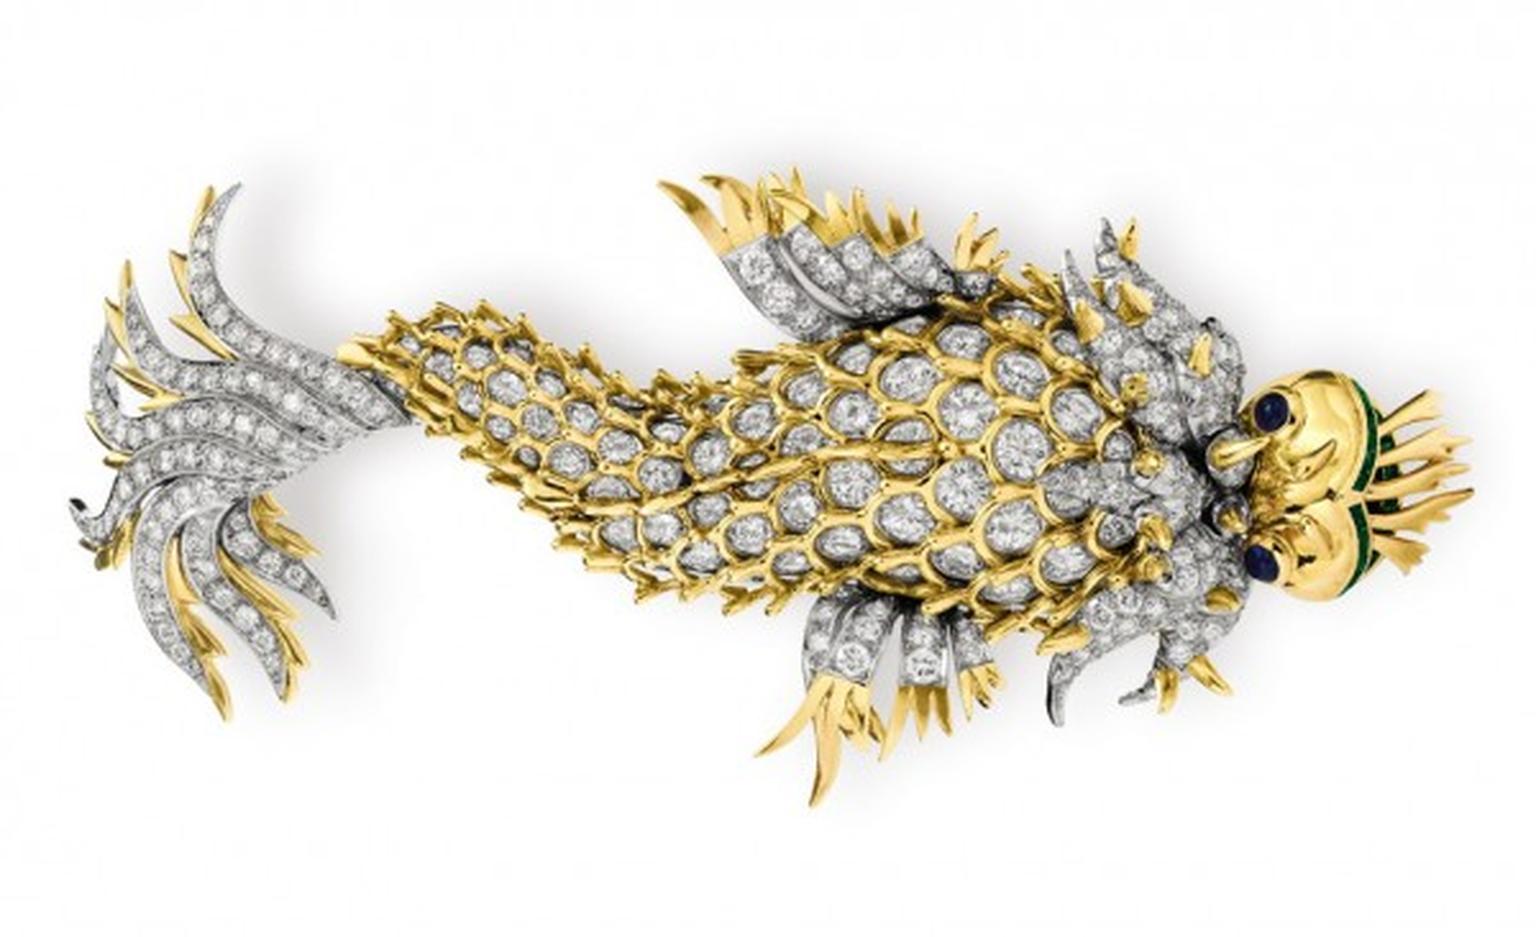 Night of the Iguana brooch by Schlumberger at Tiffany from Richard Burton.